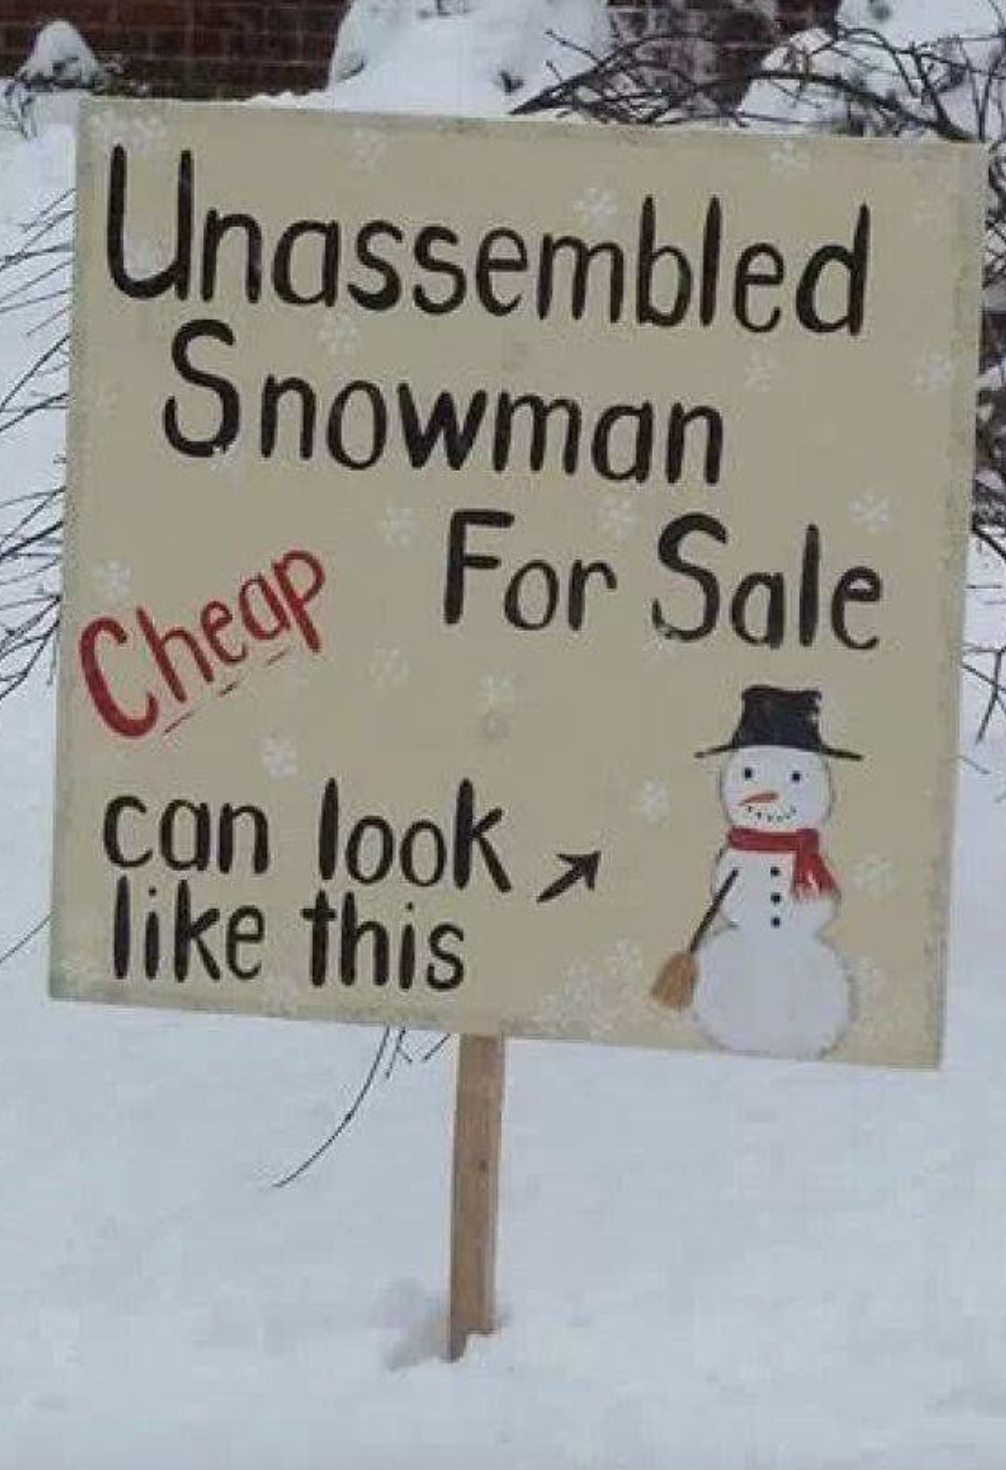 Sign reads &quot;Unassembled Snowman for Sale&quot; with an arrow pointing to snow and a drawing of a snowman for reference